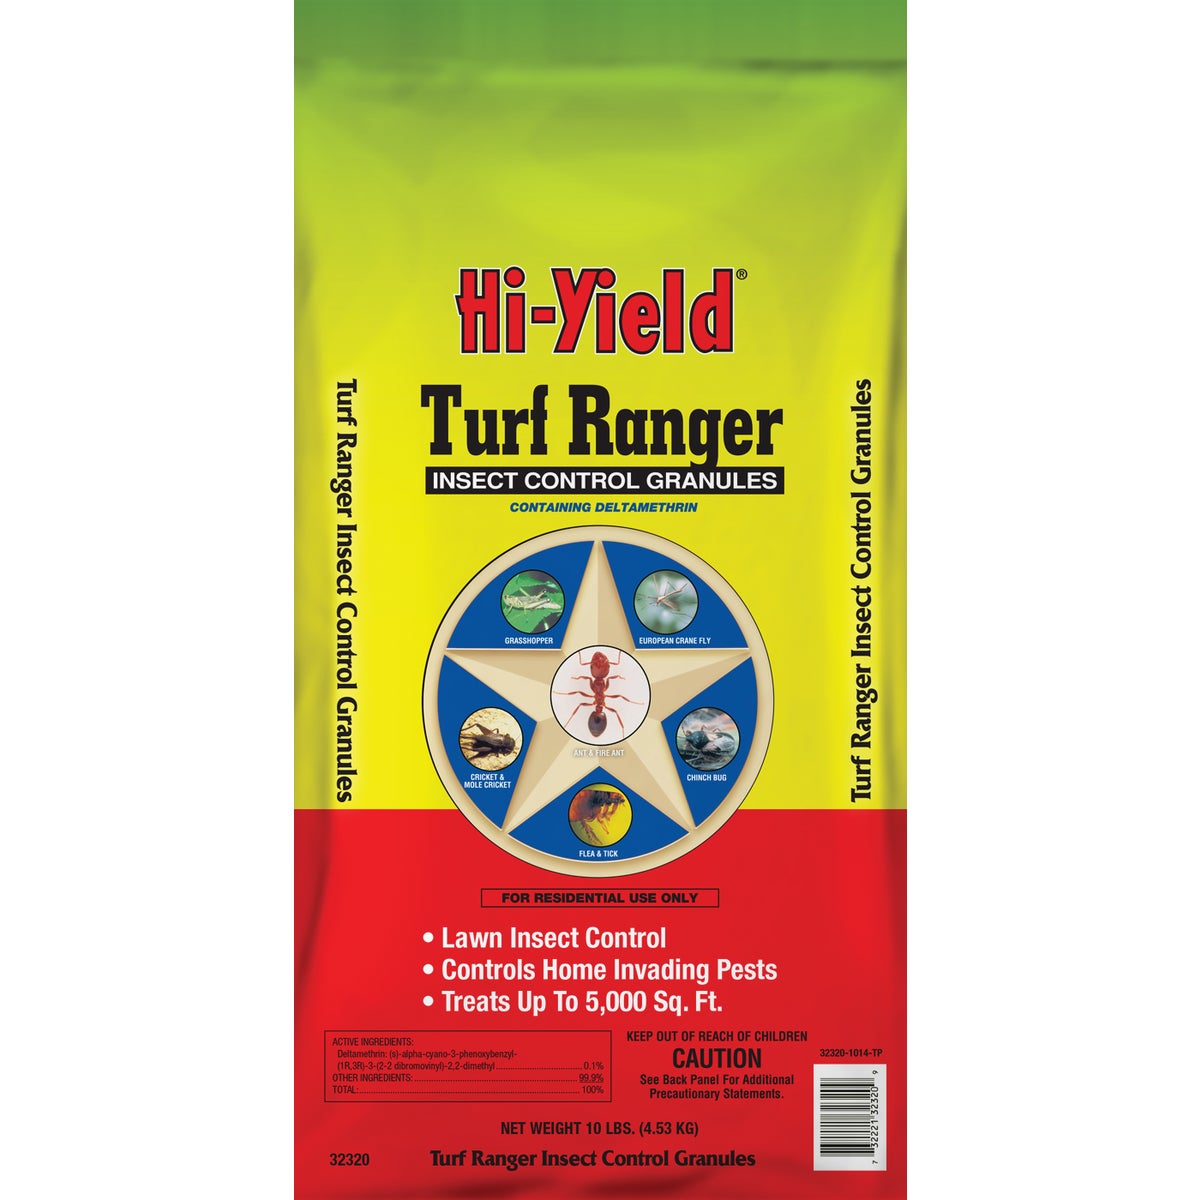 Item 700716, Broad spectrum residual insecticide for the control of certain insects in 